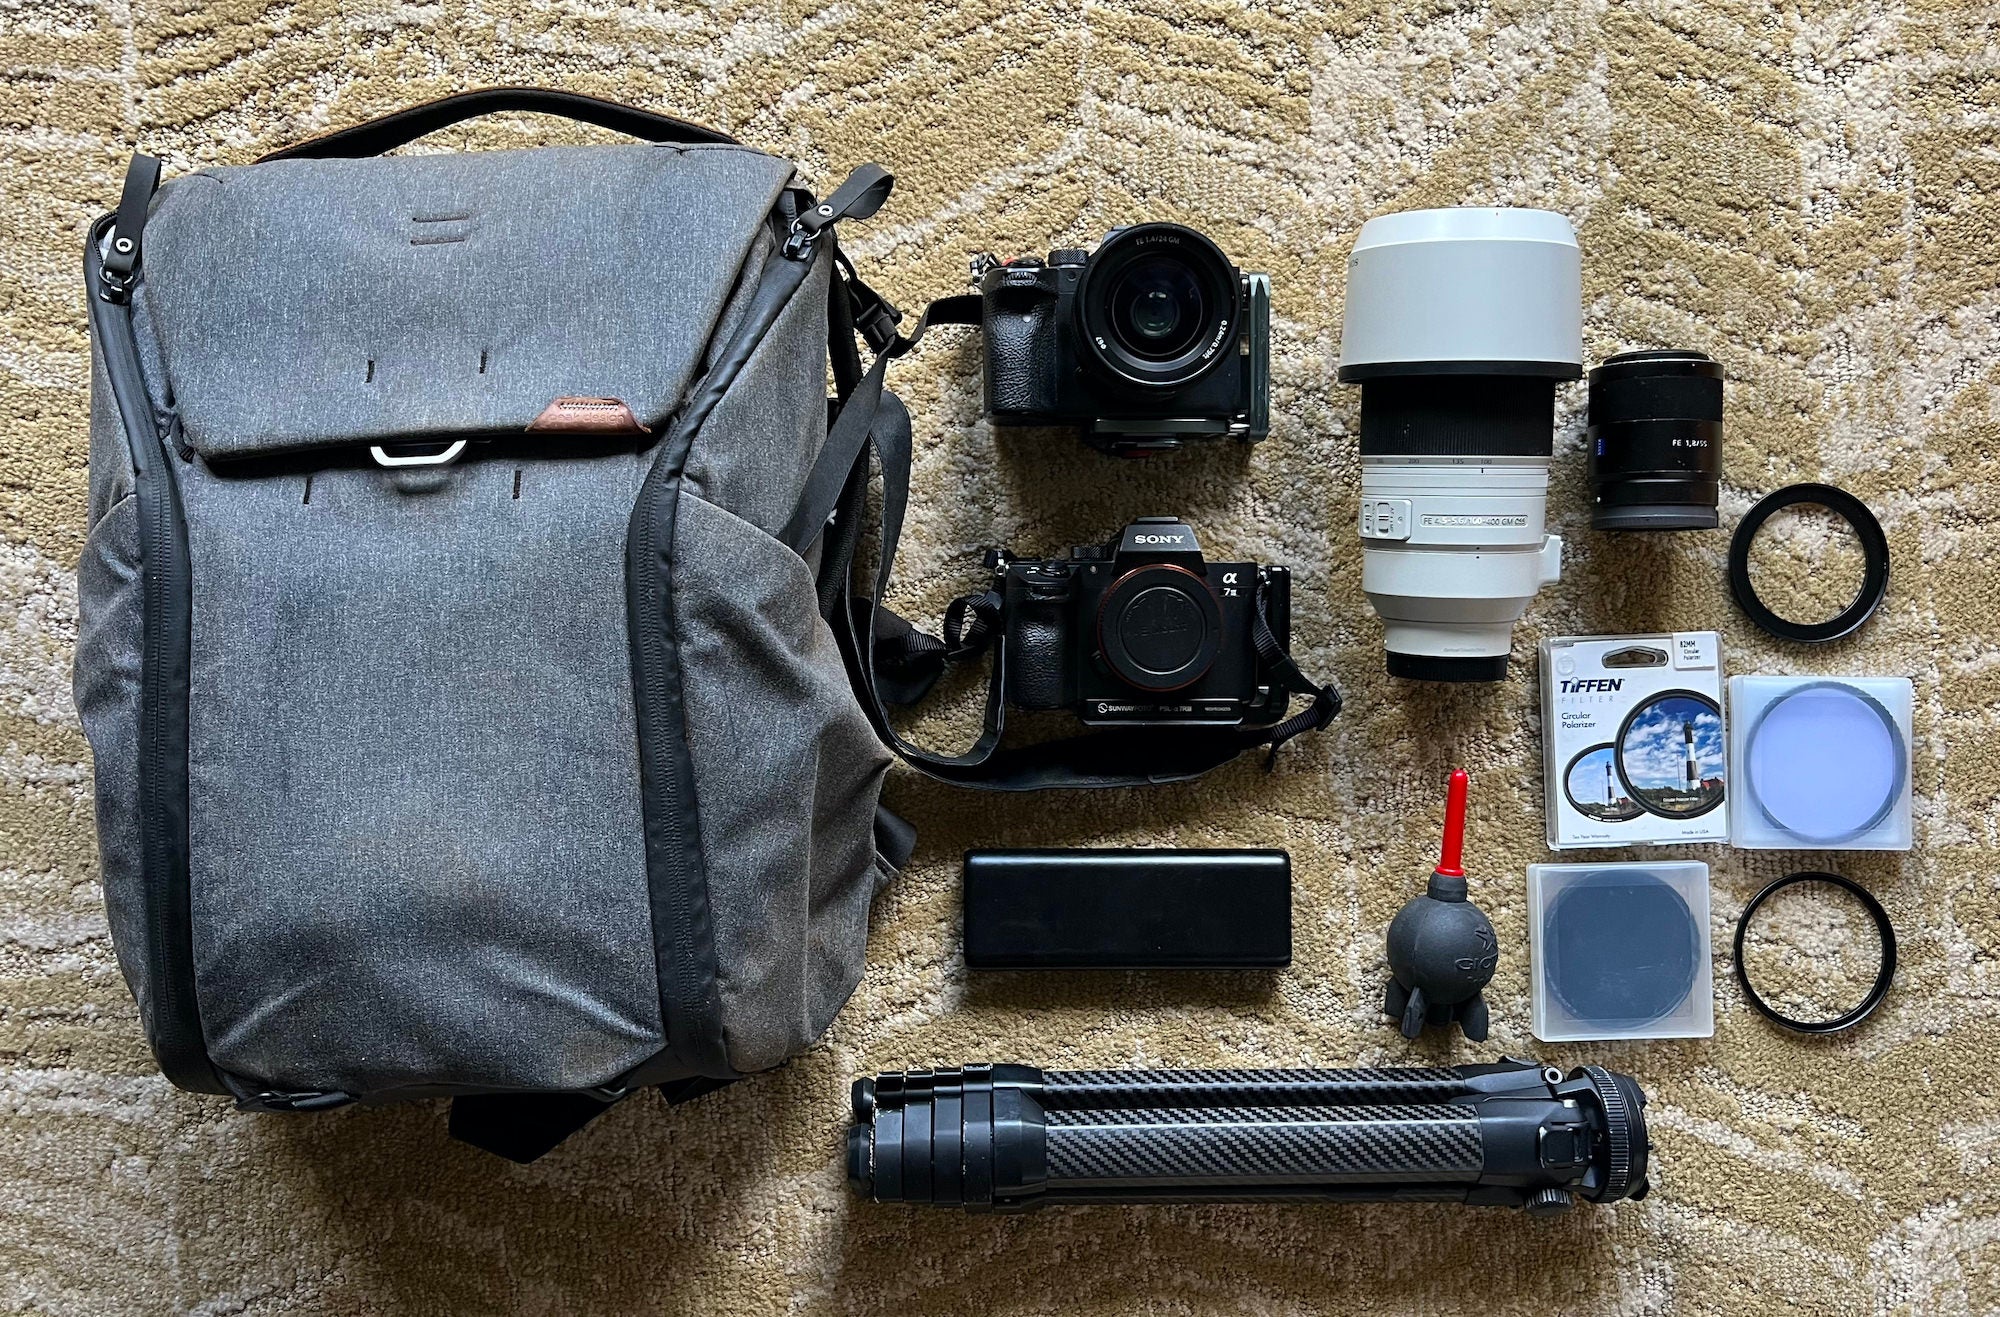 Shane Ware's travel and adventure photography kit